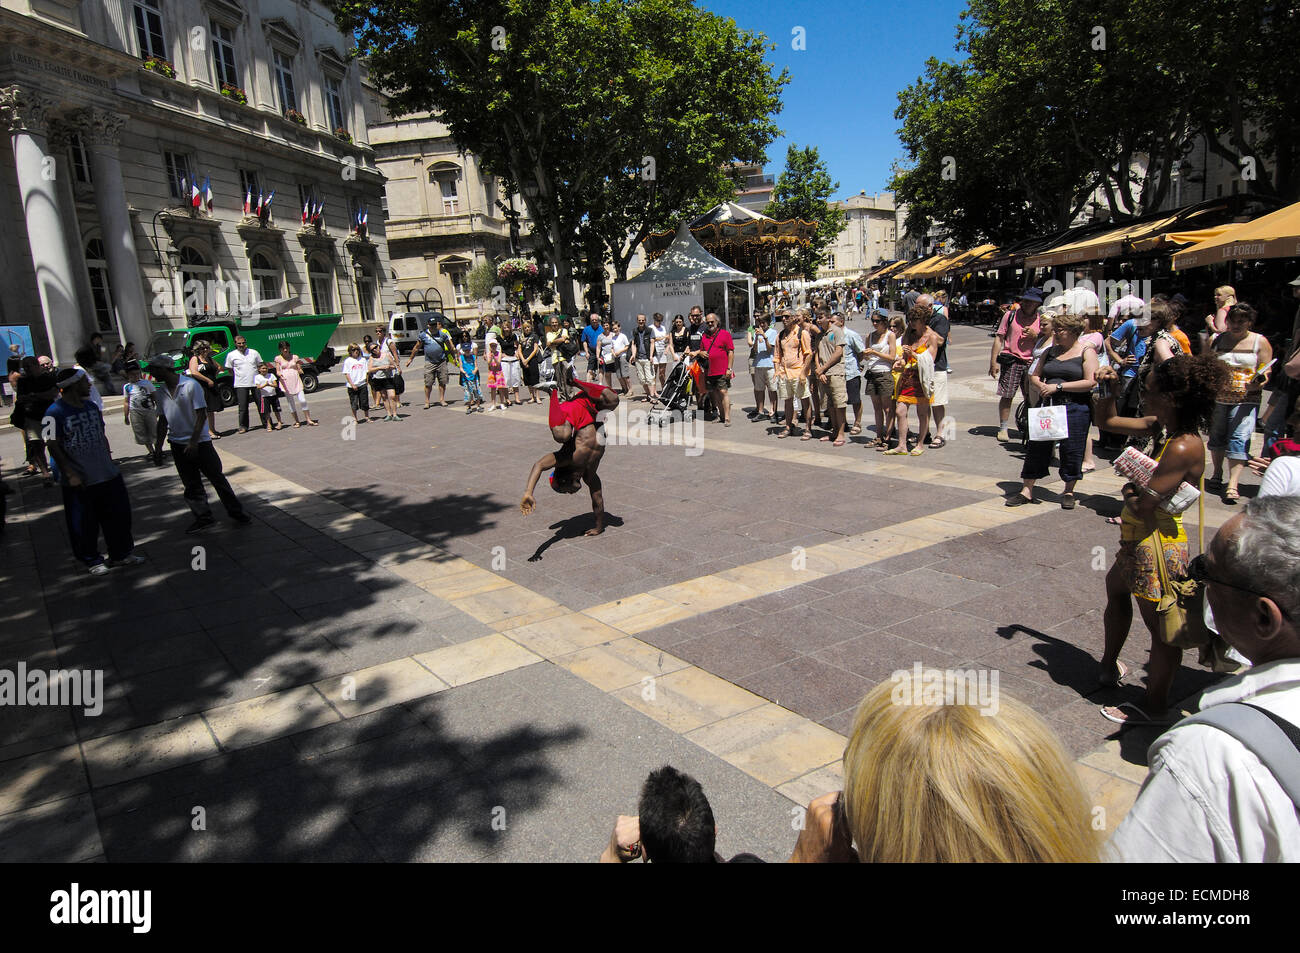 Streetdance spectacle during the Summer Festival of Avignon, Avignon, Vaucluse, Rhone valley, Provence, France, Europe Stock Photo